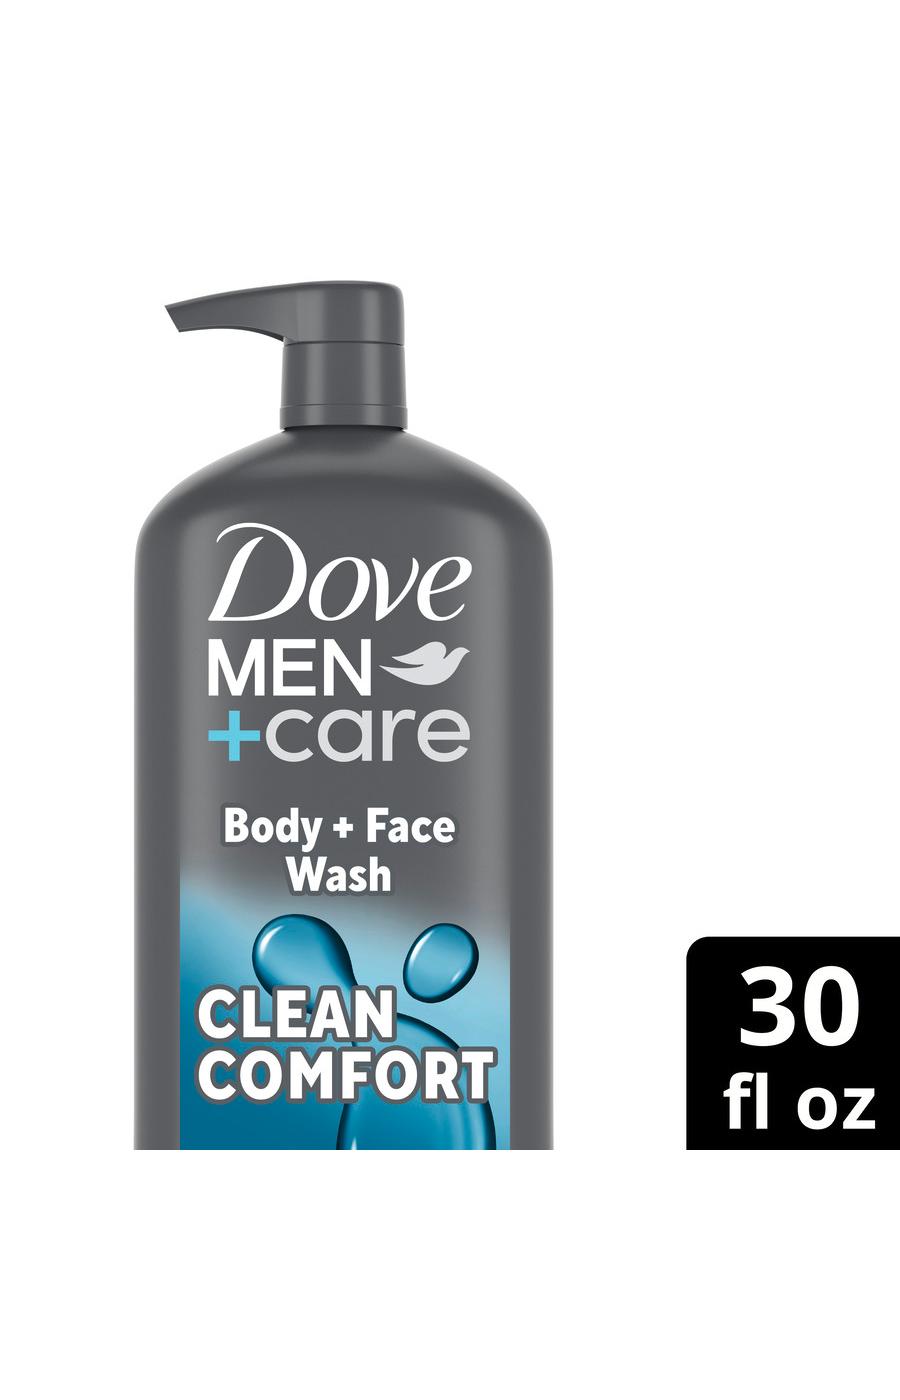 Dove Men+Care Hydrating Body + Face Wash - Clean Comfort; image 3 of 6